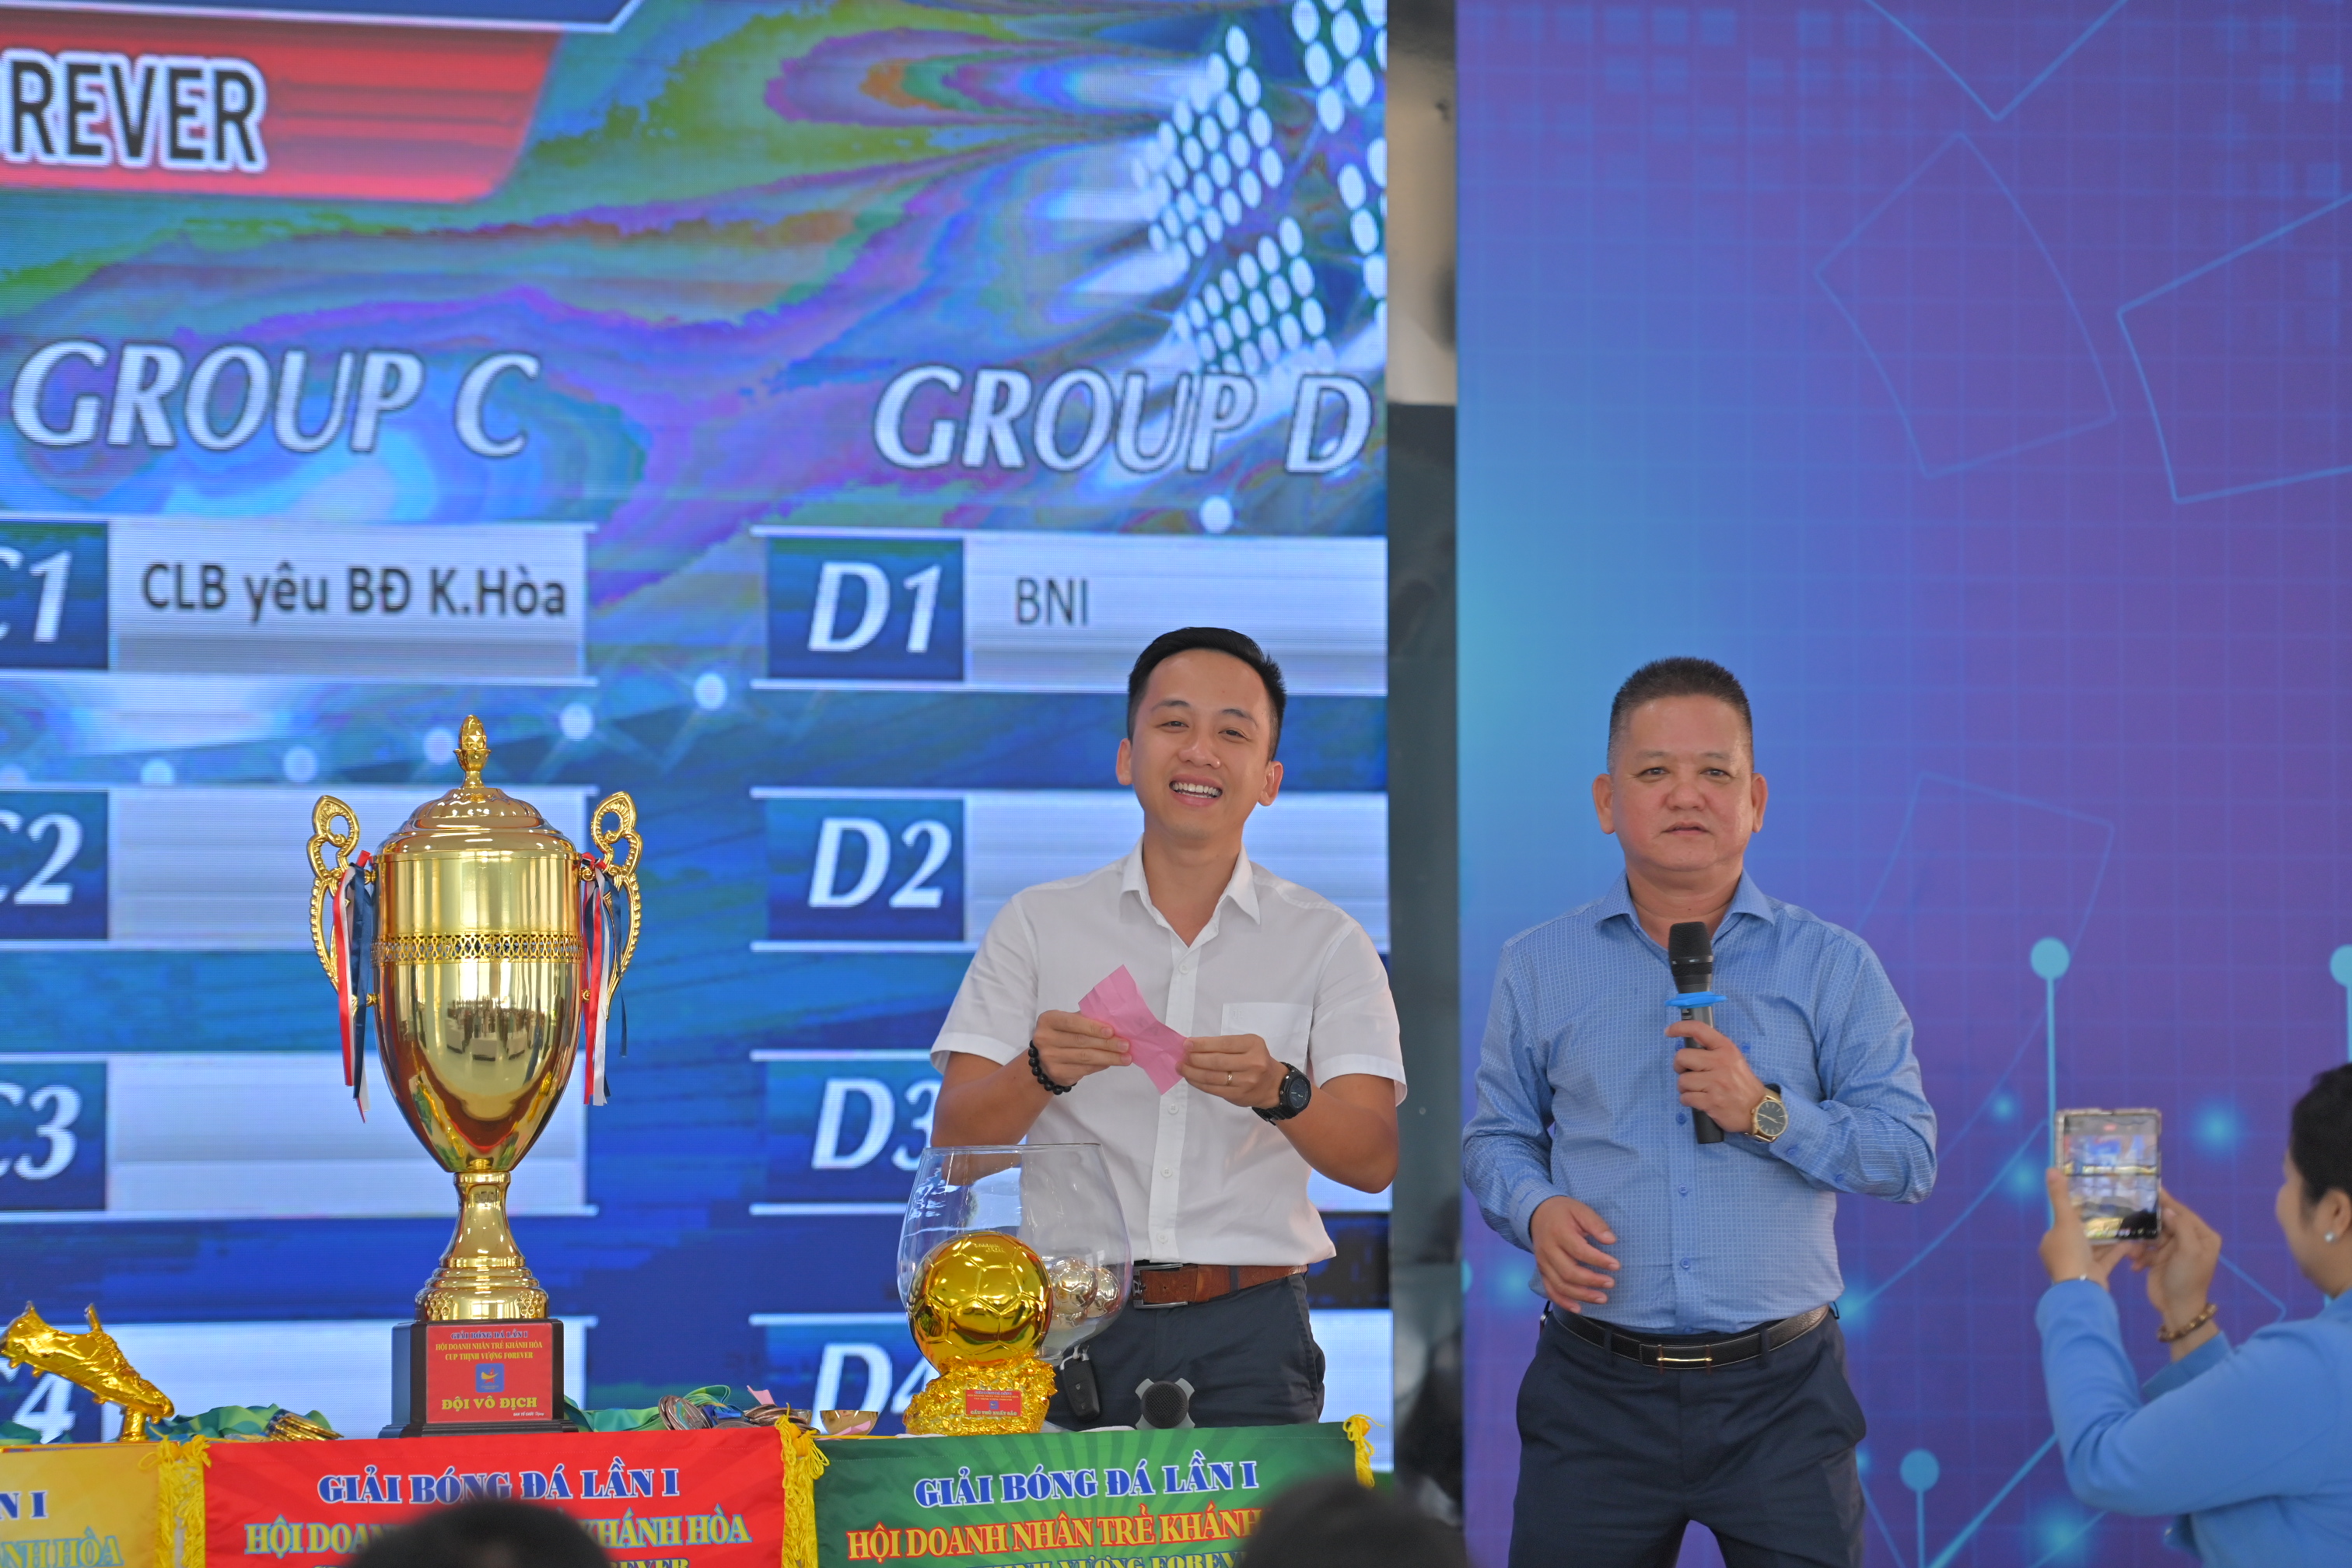 16 teams join football tournament for young Khanh Hoa businessmen